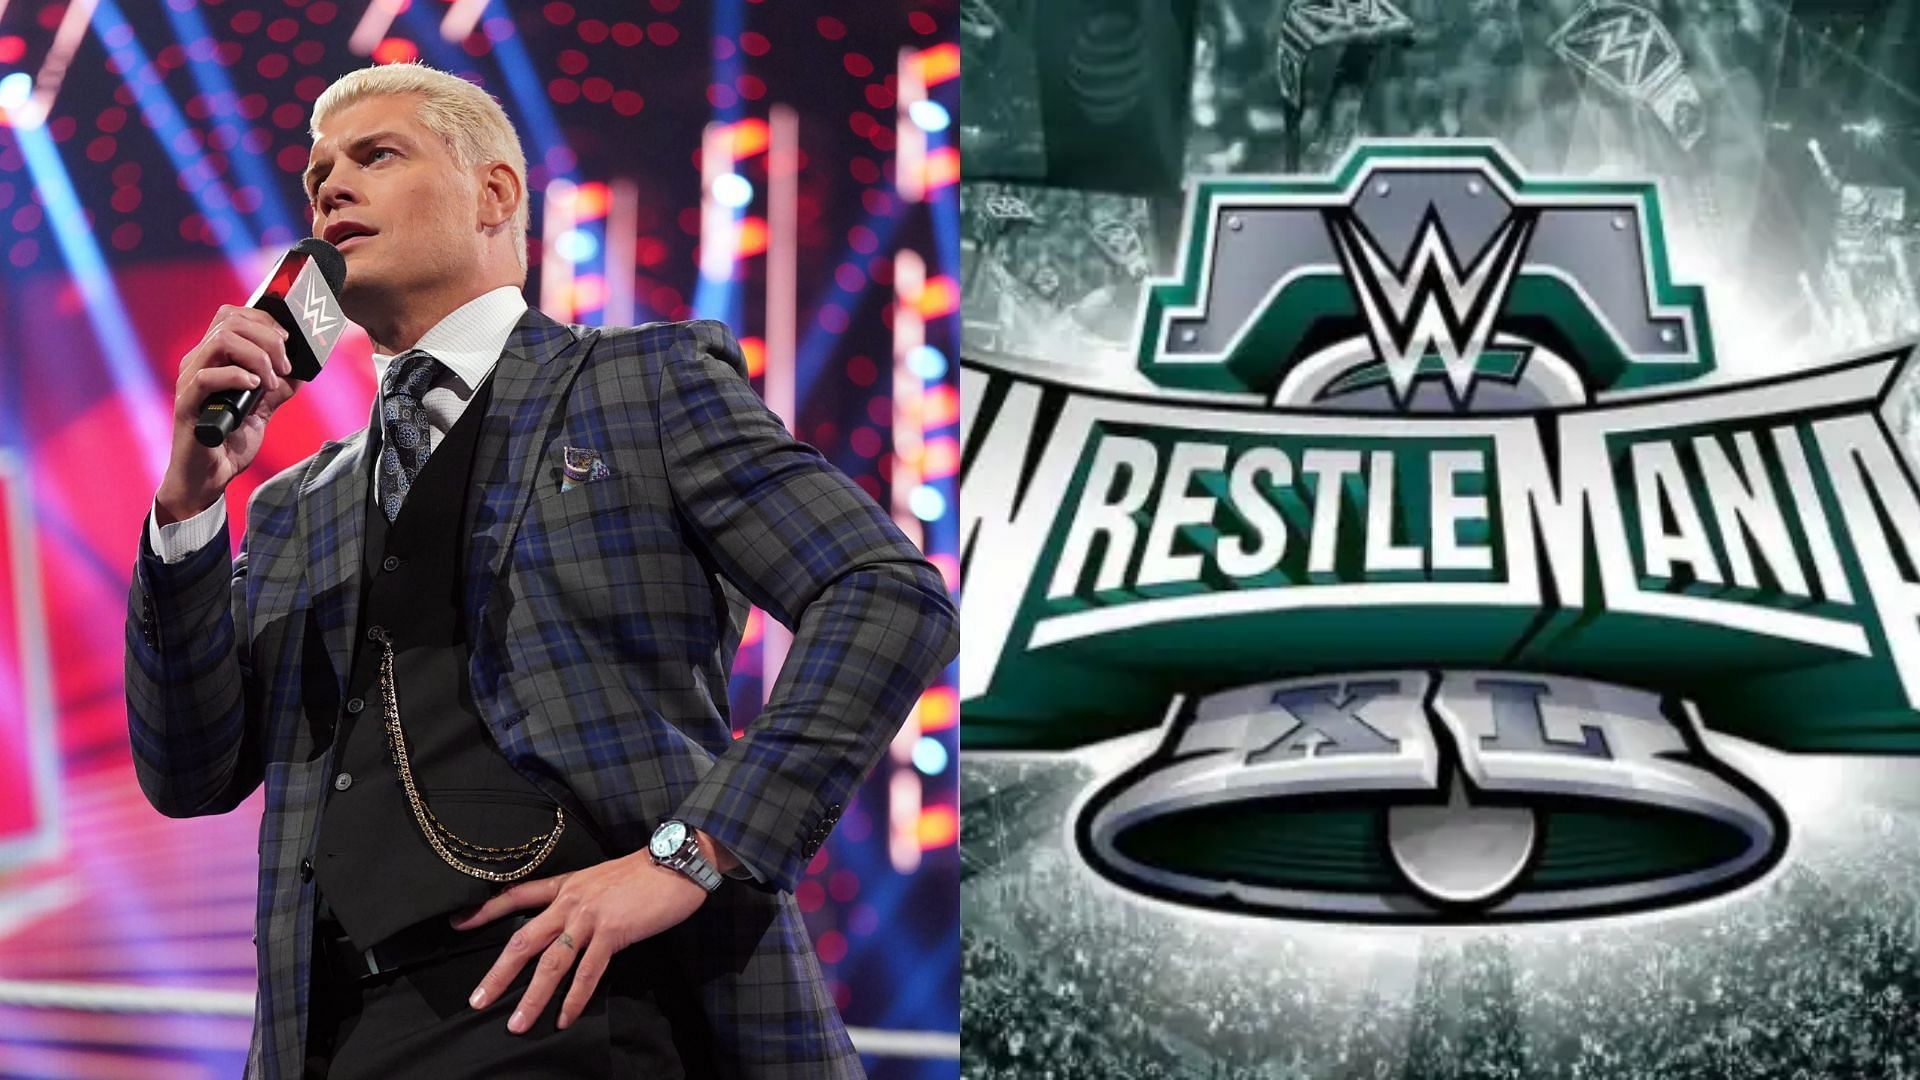 Either Cody Rhodes or The Rock look set to be challenging Roman Reigns at WrestleMania